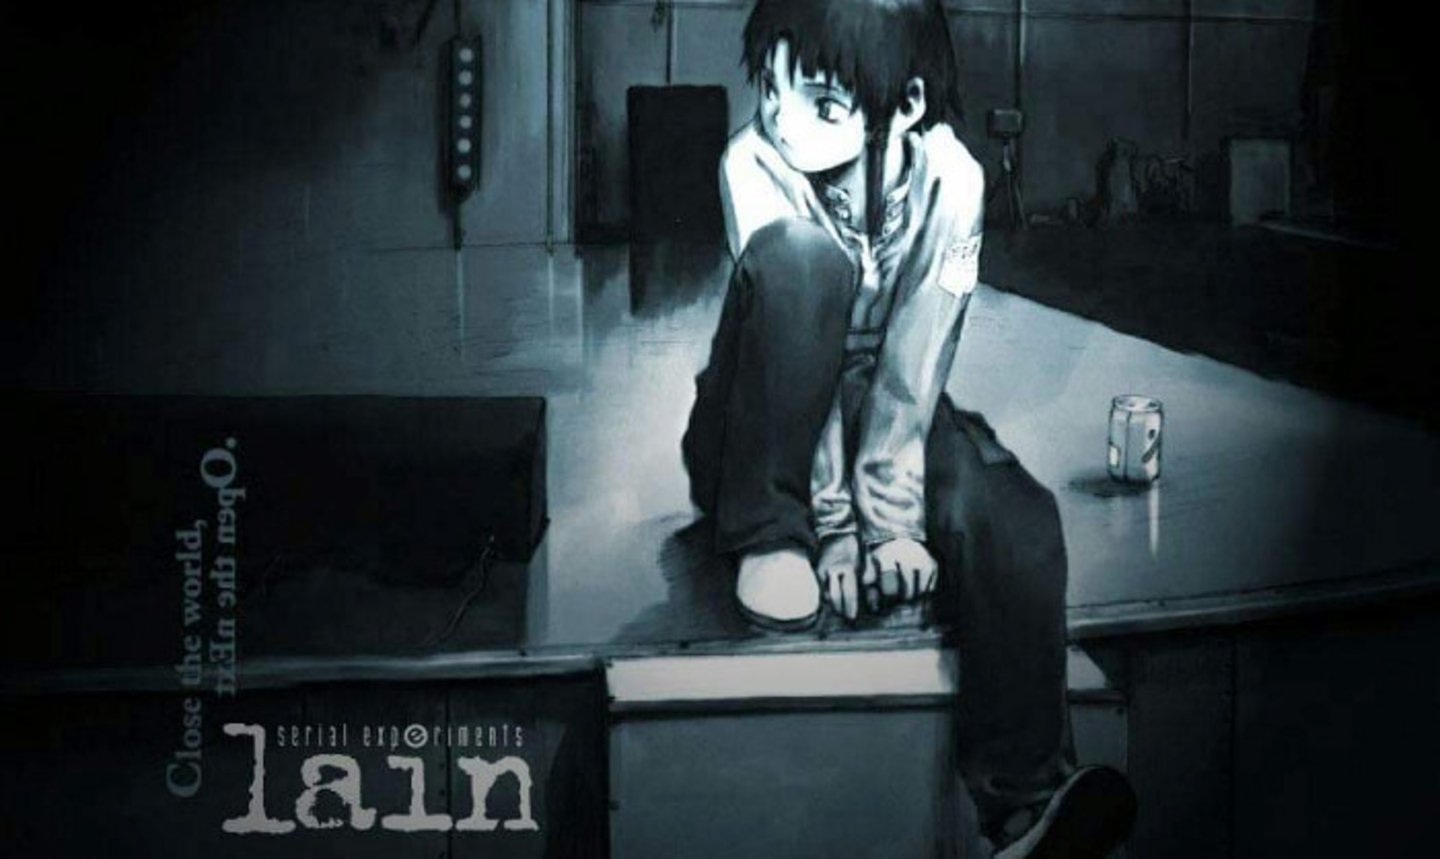 Serial Experiments Lain deals with philosophical and psychological topics, which makes it quite similar to Evangelion